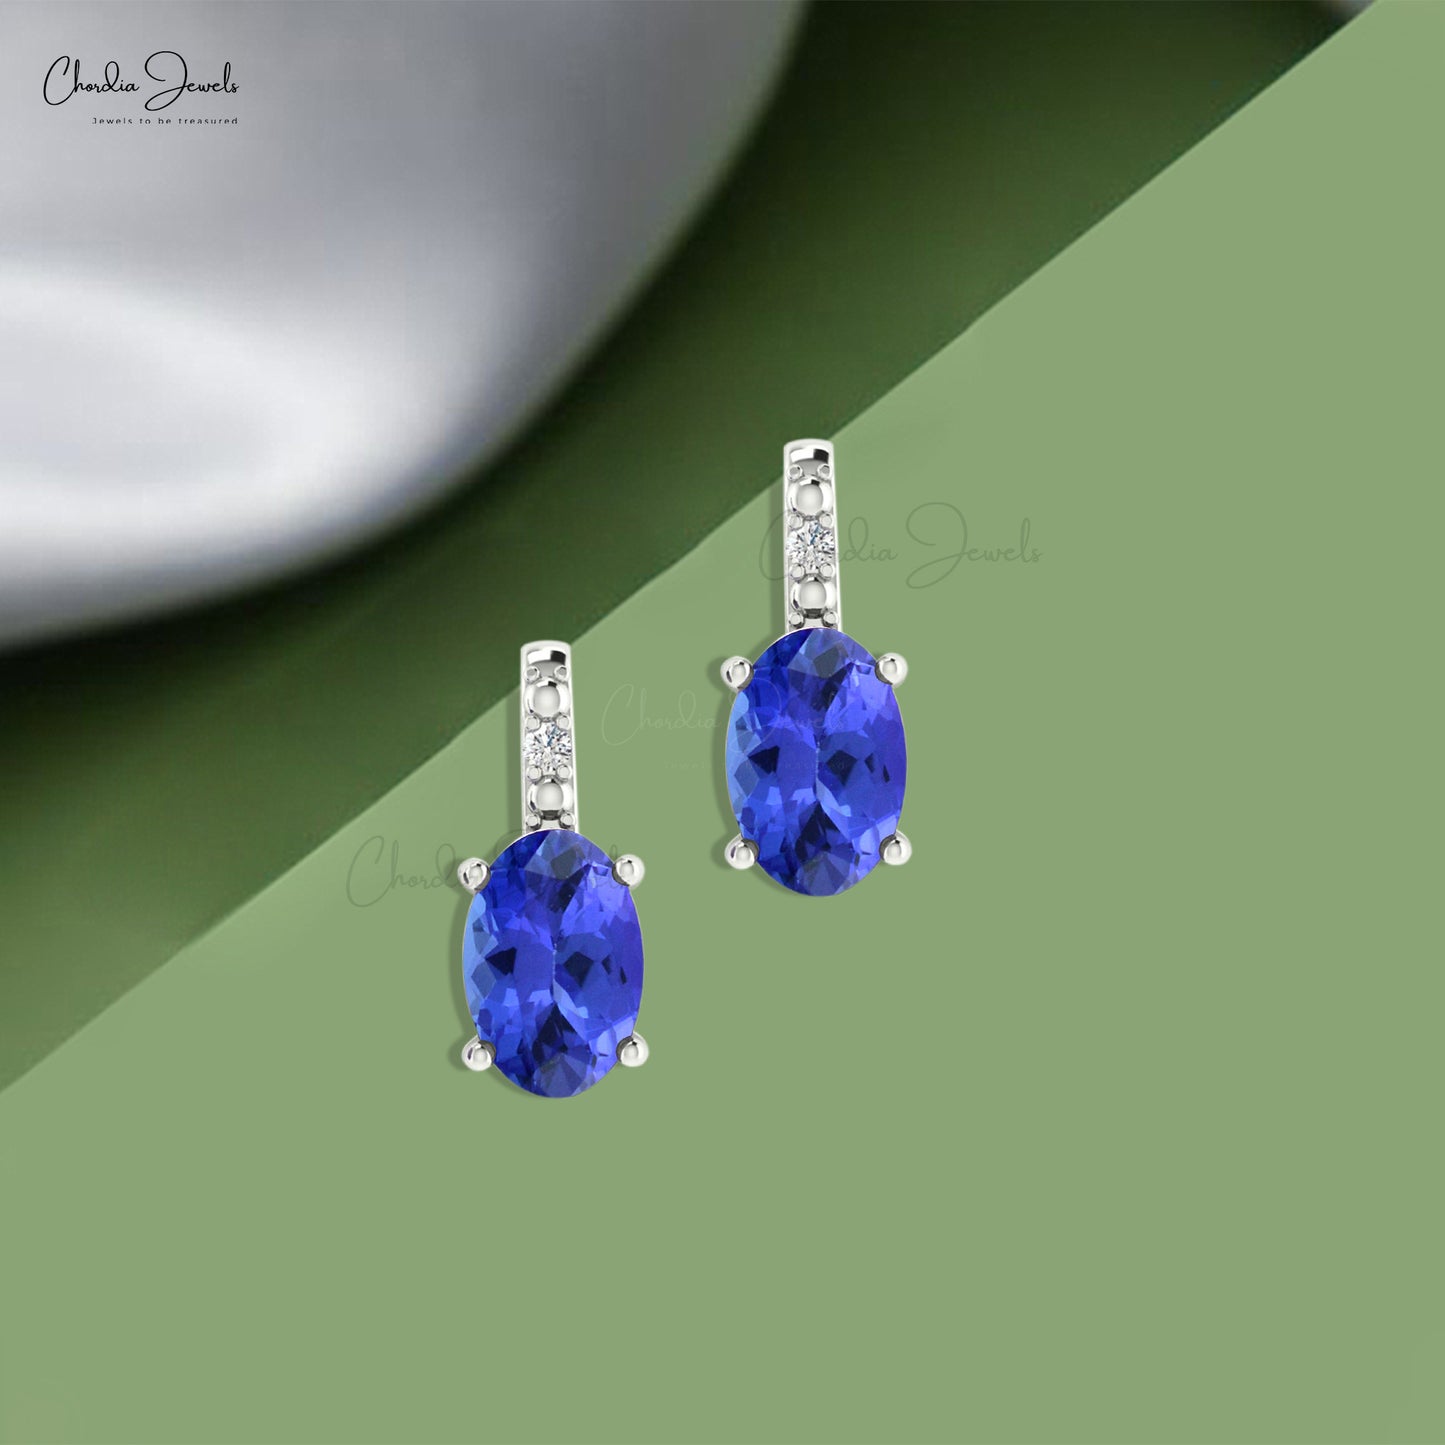 Sparkling Blue Tanzanite & Diamond Accented Earrings 6x4mm Oval Cut Natural Gemstone Minimalist Jewelry For Gift